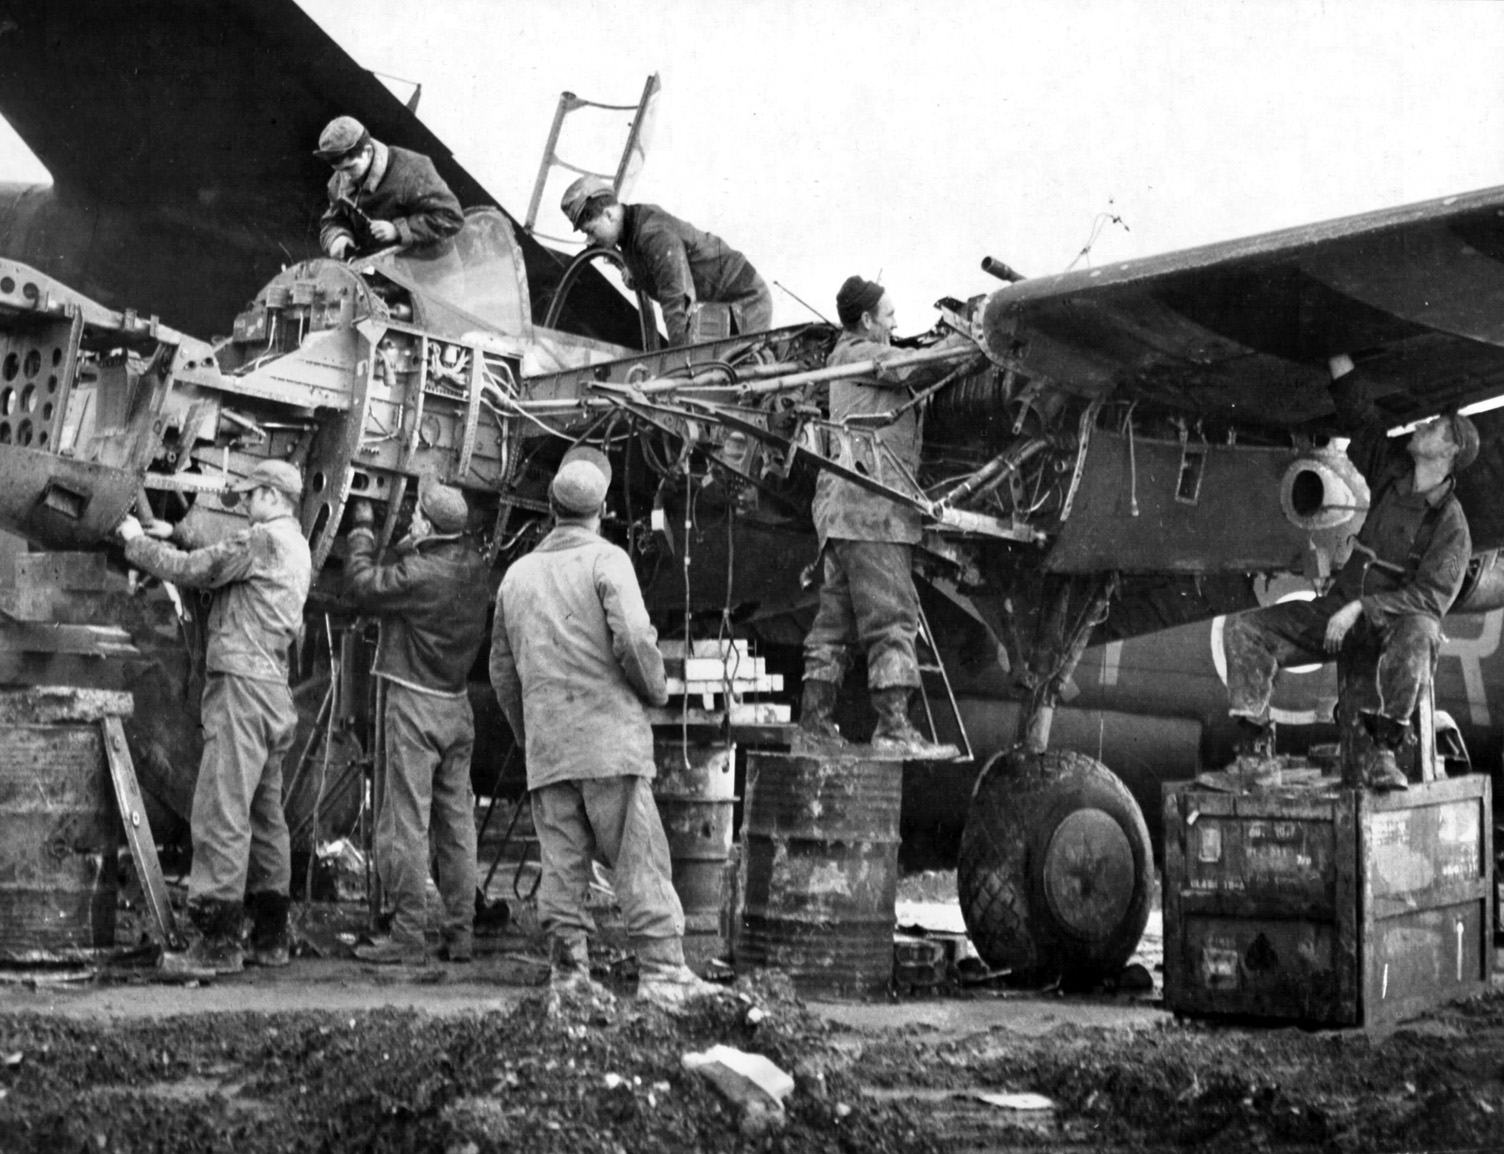 An efficient ground crew overhauls an engine and other components of a 474th Fighter Group P-38 that has flown many combat hours. The hard work of the ground crews kept the 474th P-38s flying.